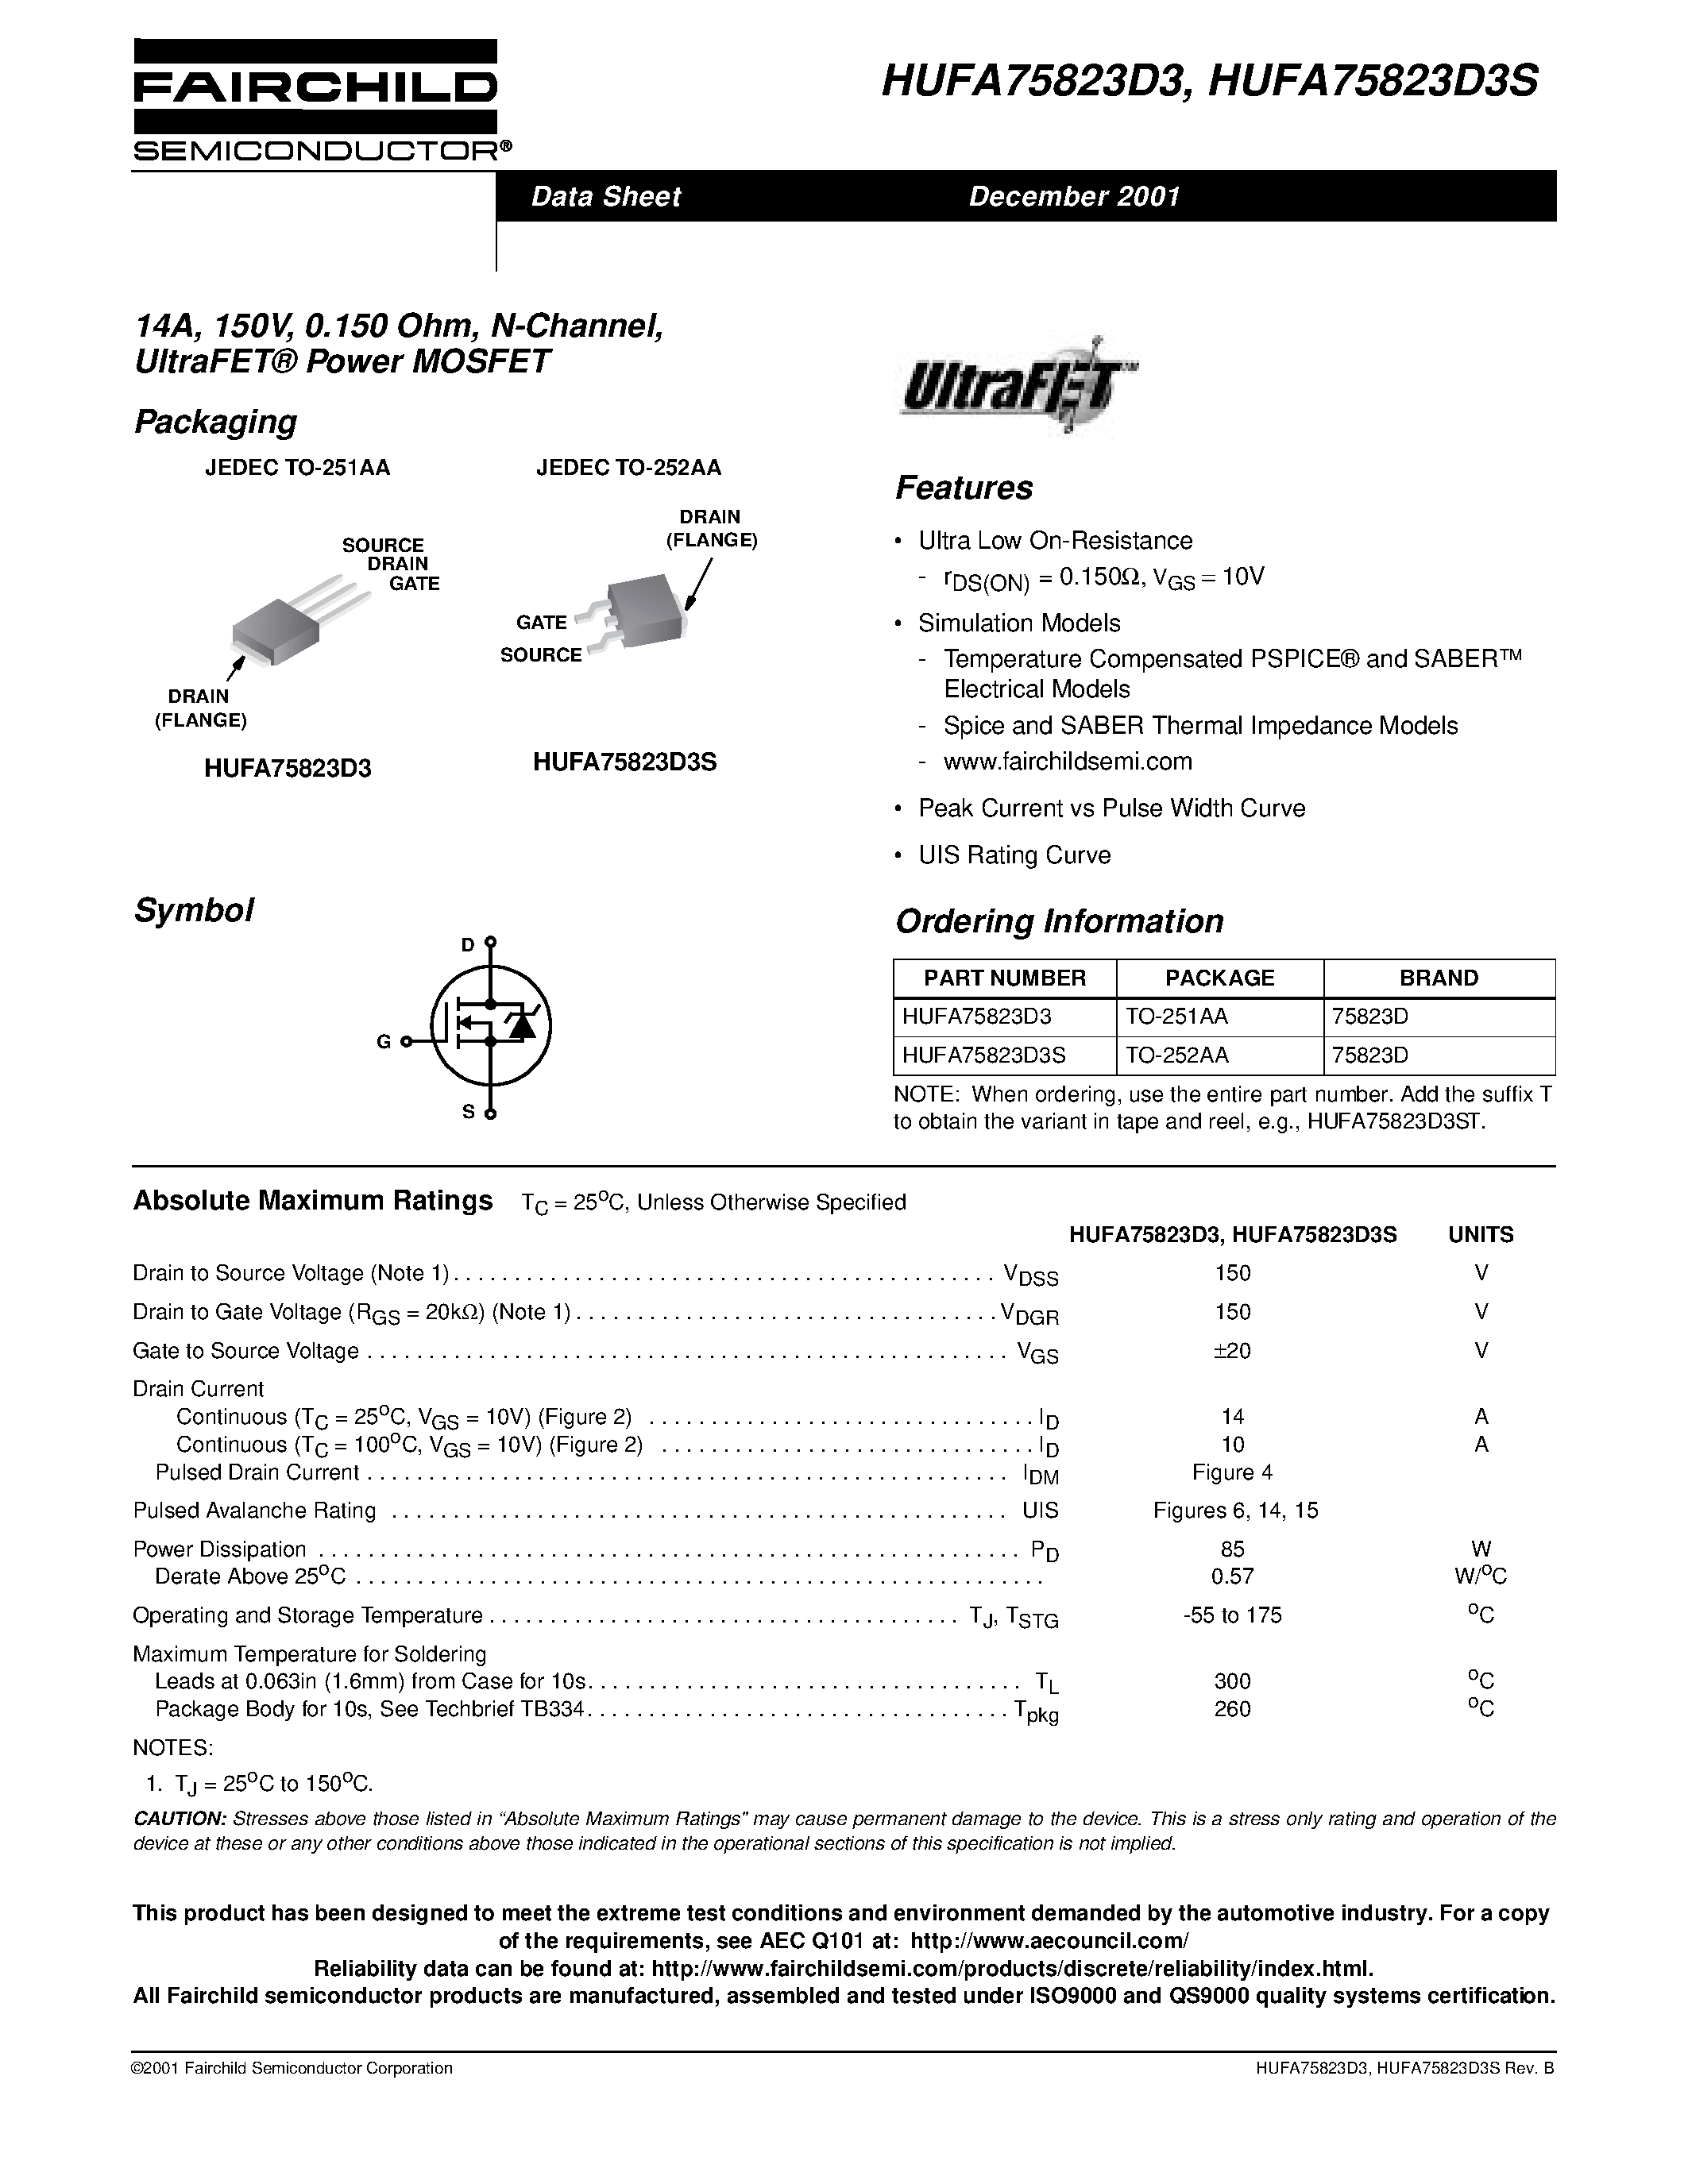 Datasheet HUFA75823D3S - 14A/ 150V/ 0.150 Ohm/ N-Channel/ UltraFET Power MOSFET page 1